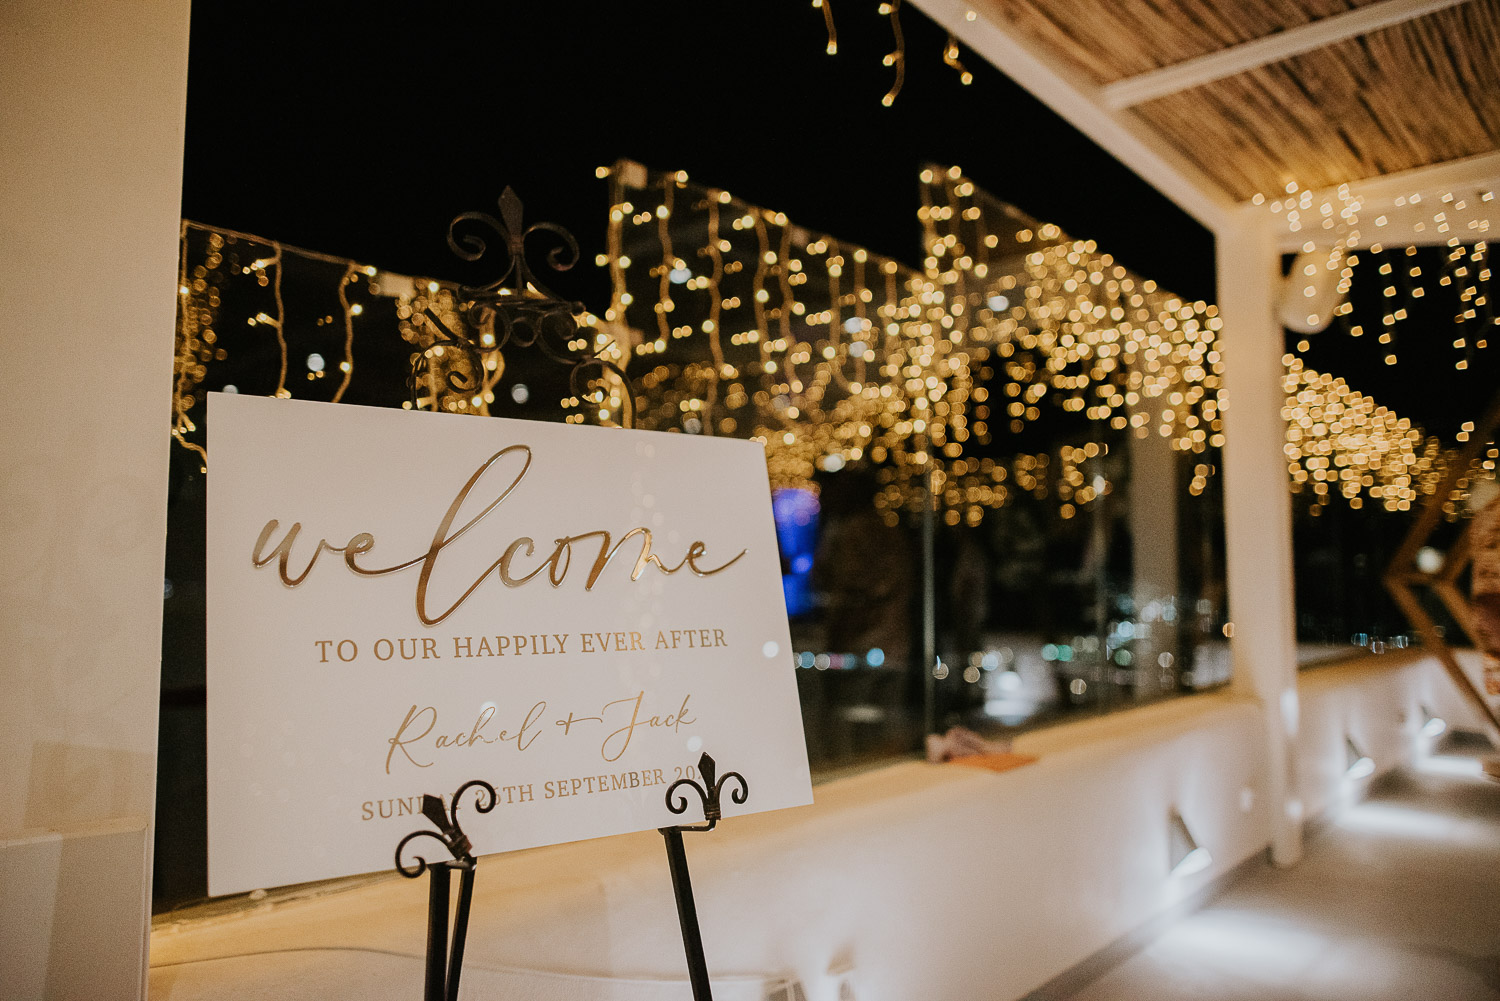 Wedding photographer Santorini: welcome sign beautifully lit by the fairy lights reflecting in the glass wall by Ben and Vesna.